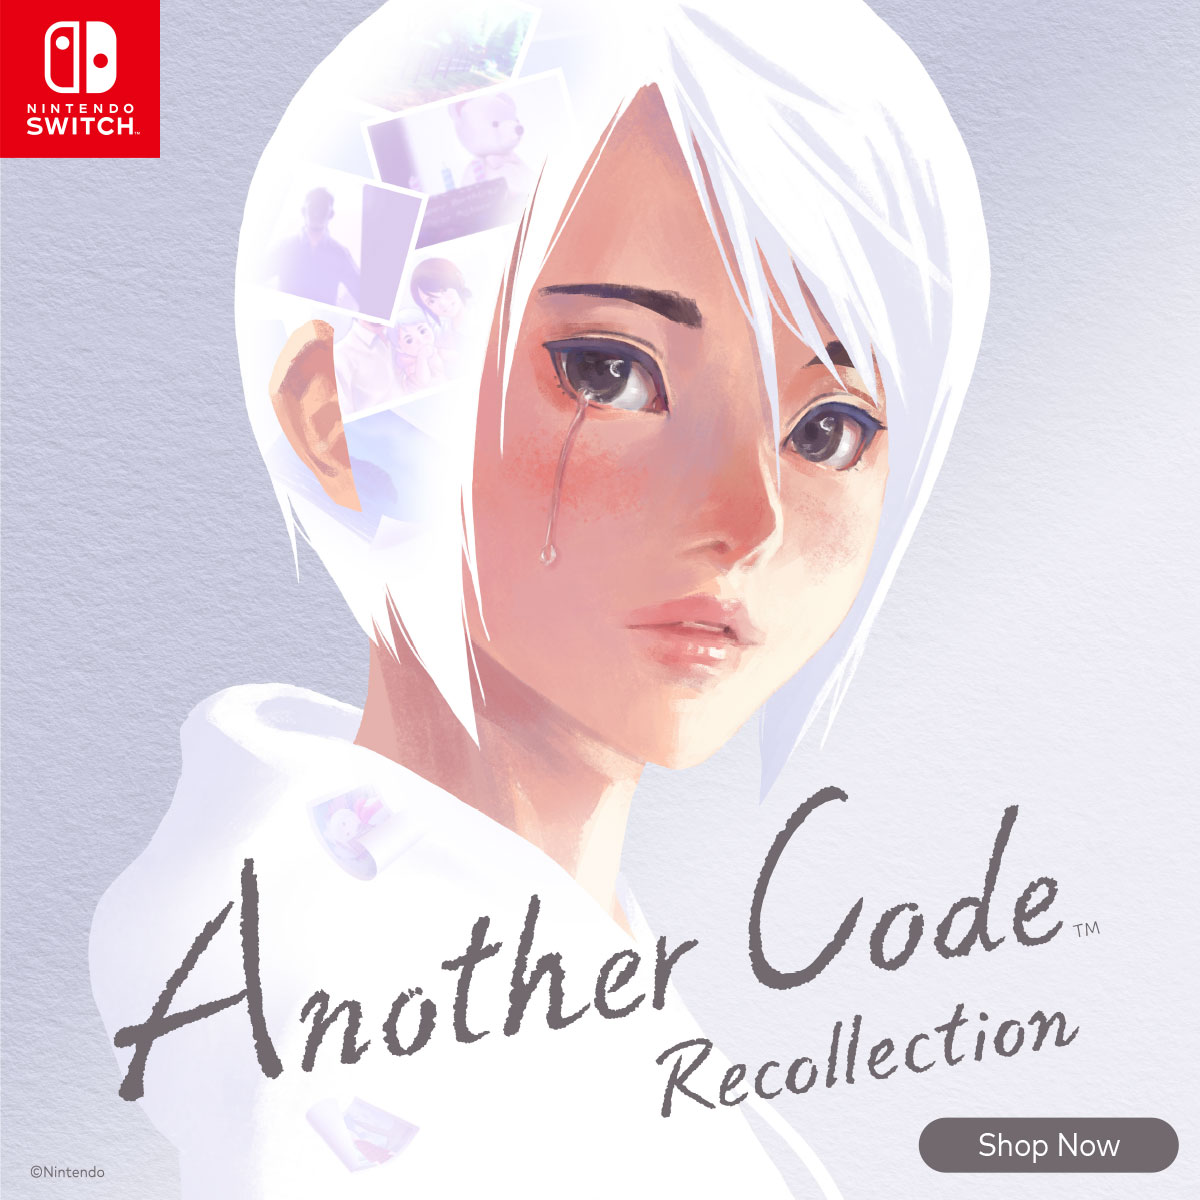 Nintendo Switch : Another Code™: Recollection